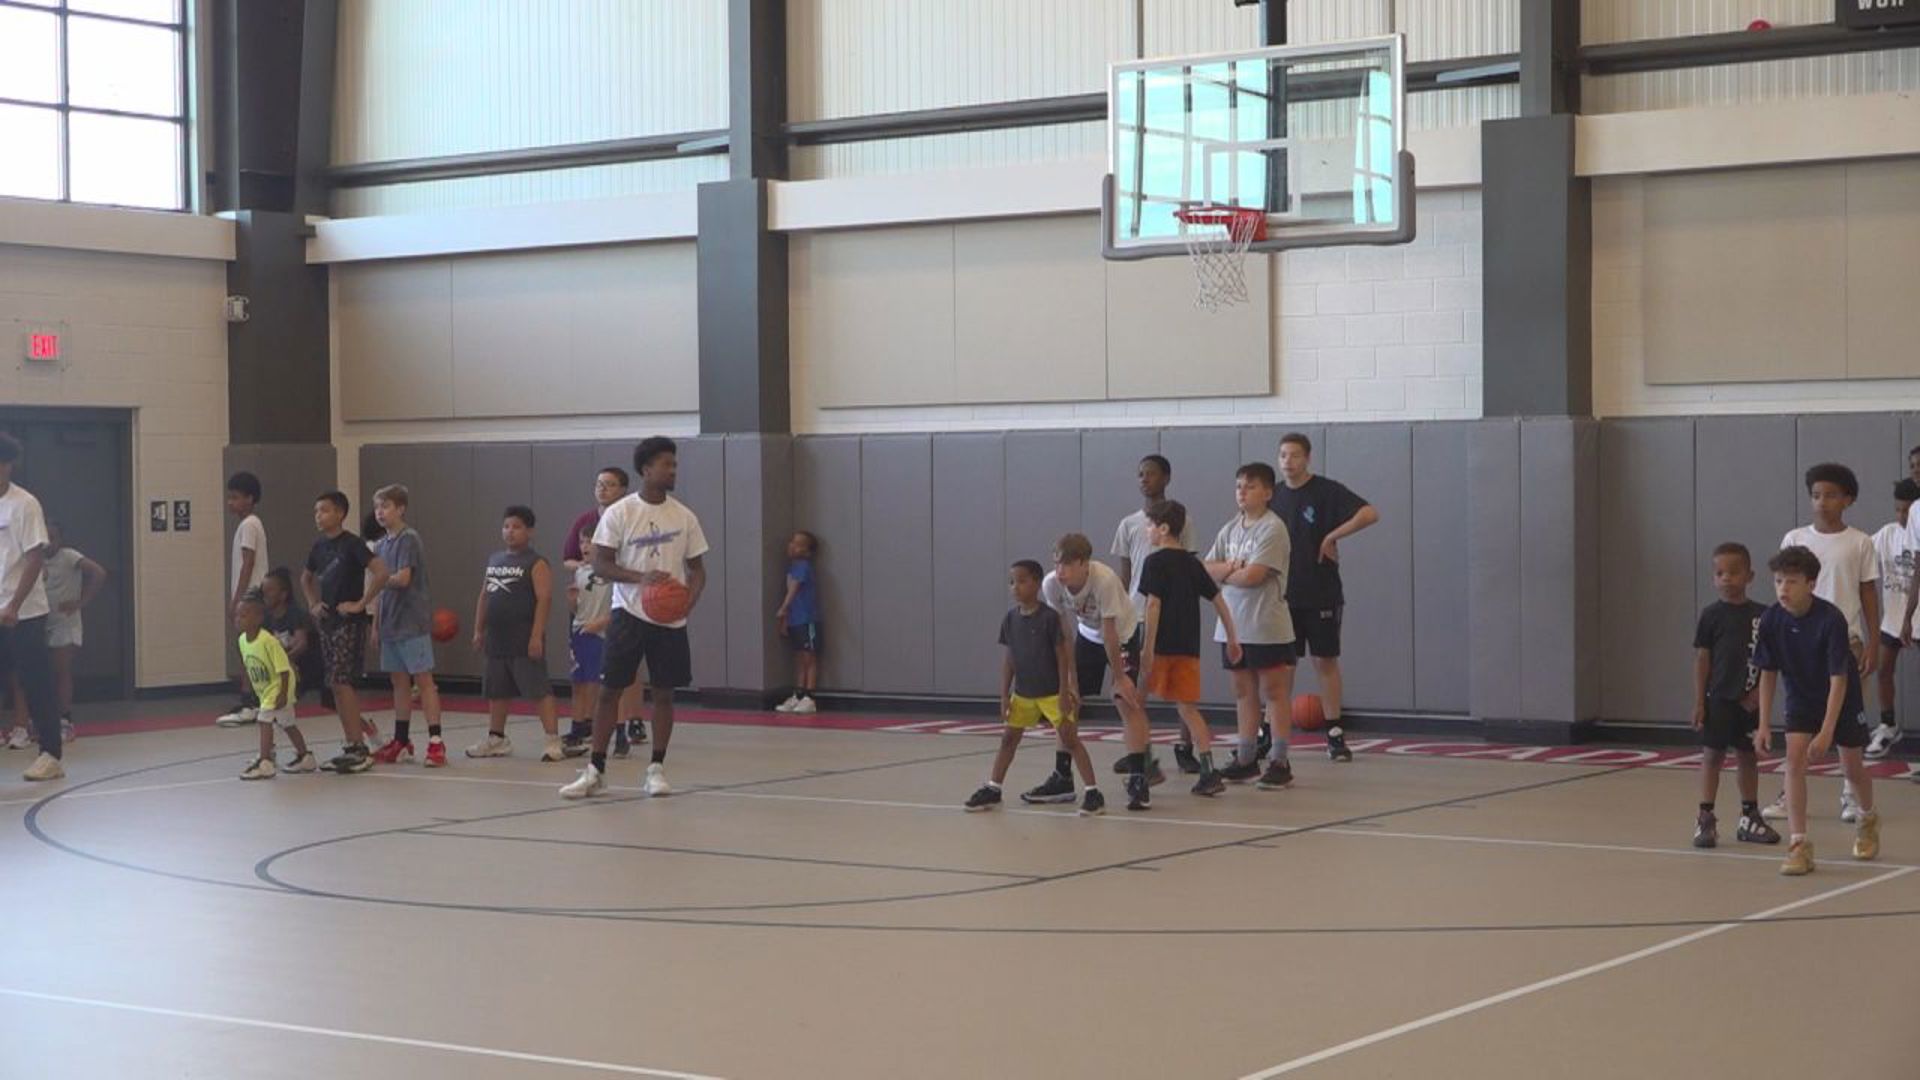 A free basketball camp in York is aiming to prevent violence and lead kids in a positive direction.